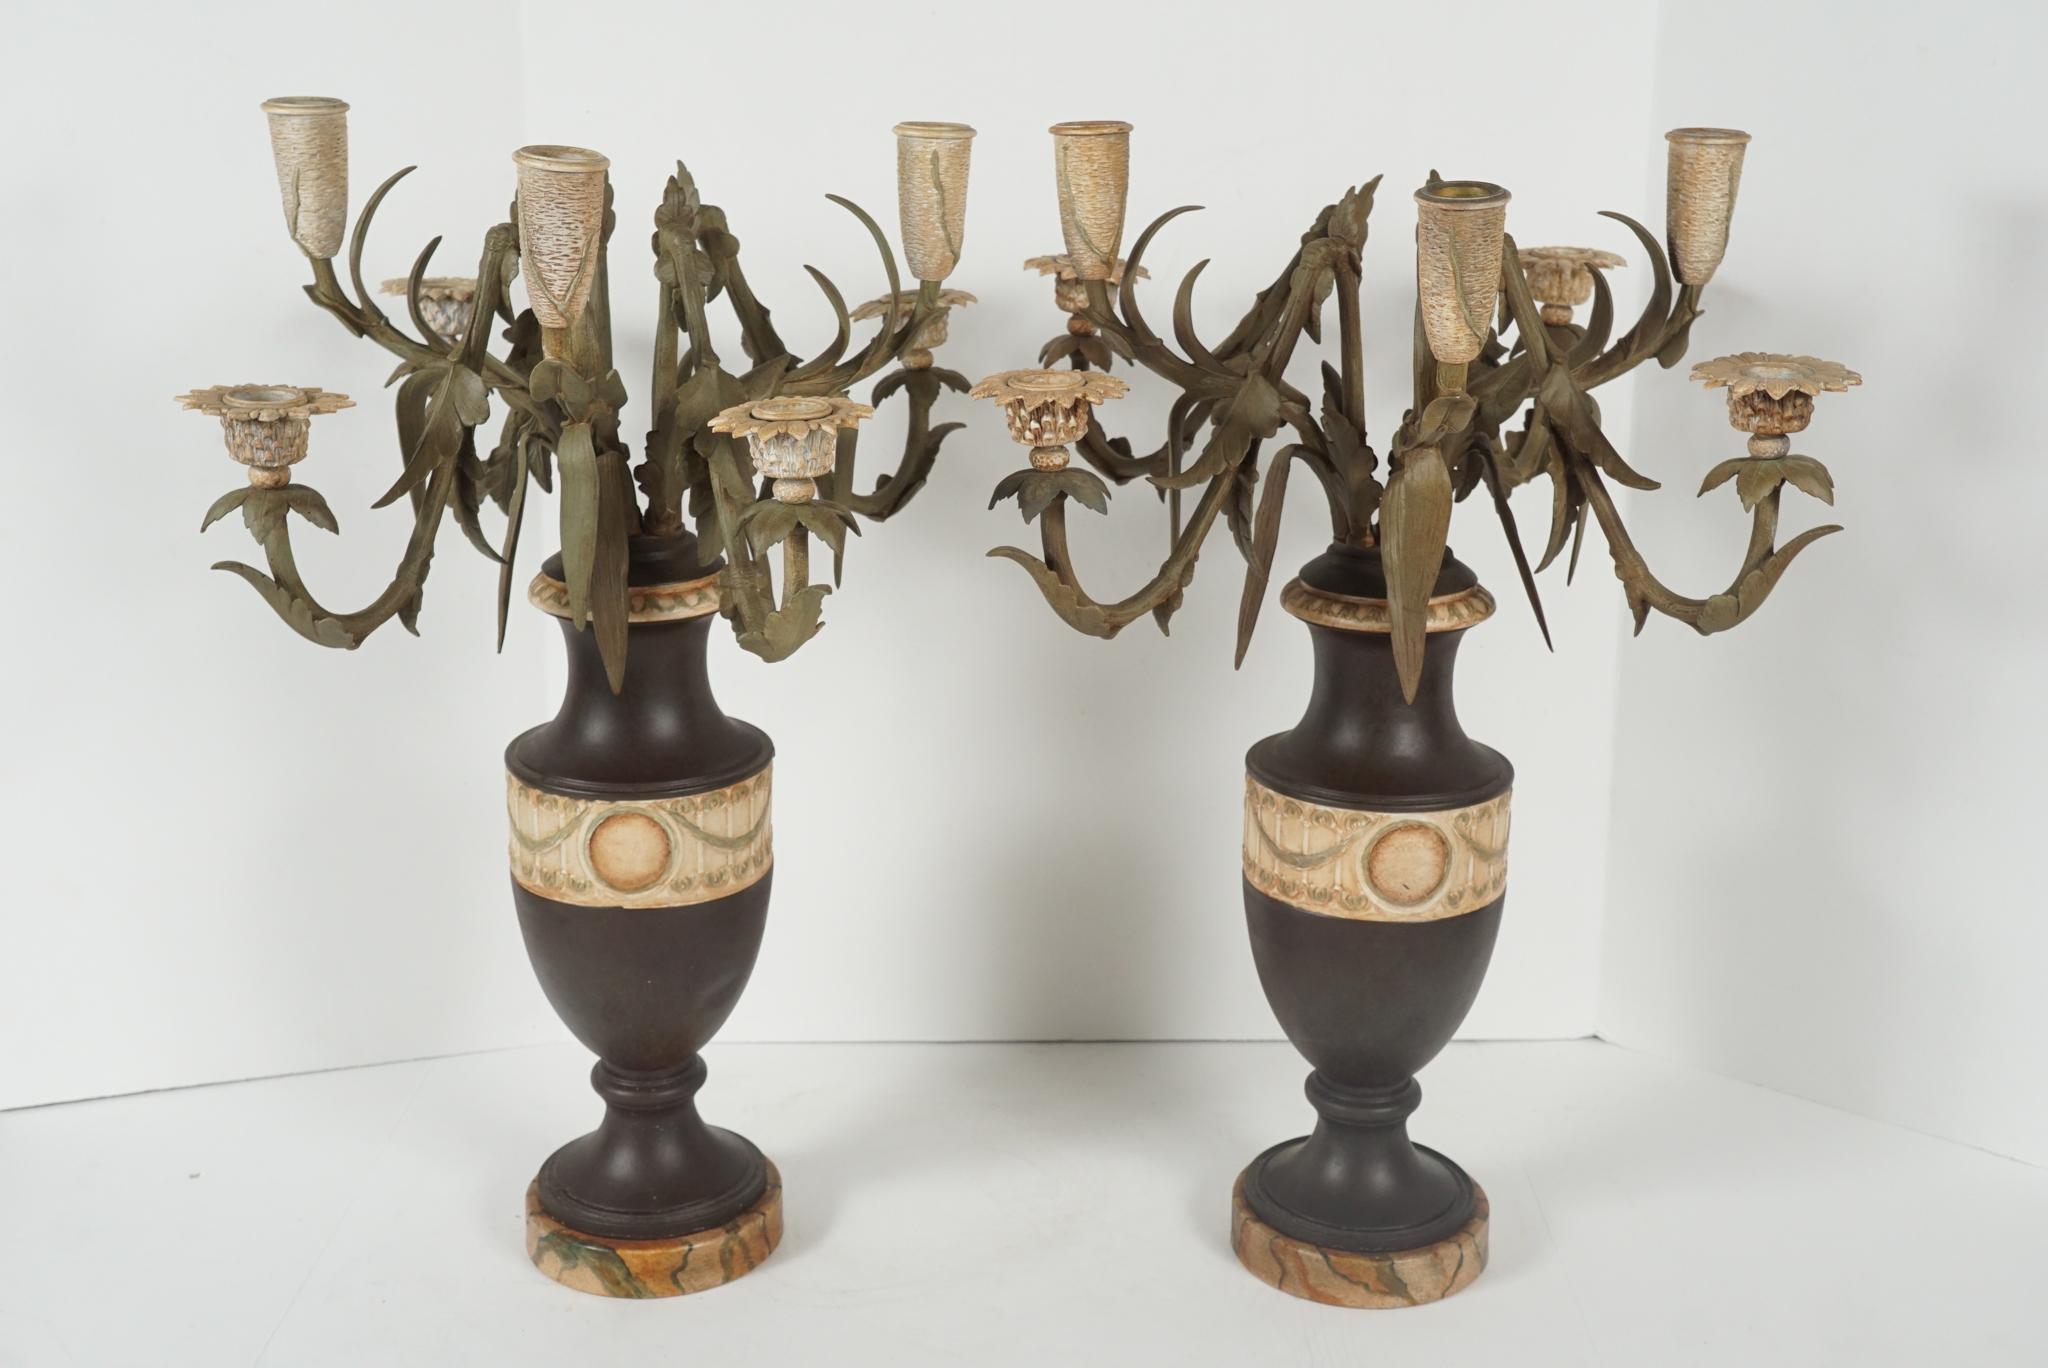 This pair of candelabra made in the form of urns holding floral arrangements are French and were cast in bronze in the 1870s. It’s possible that at one time they were gilded but they now are tole painted and appear to have been so for some time. The